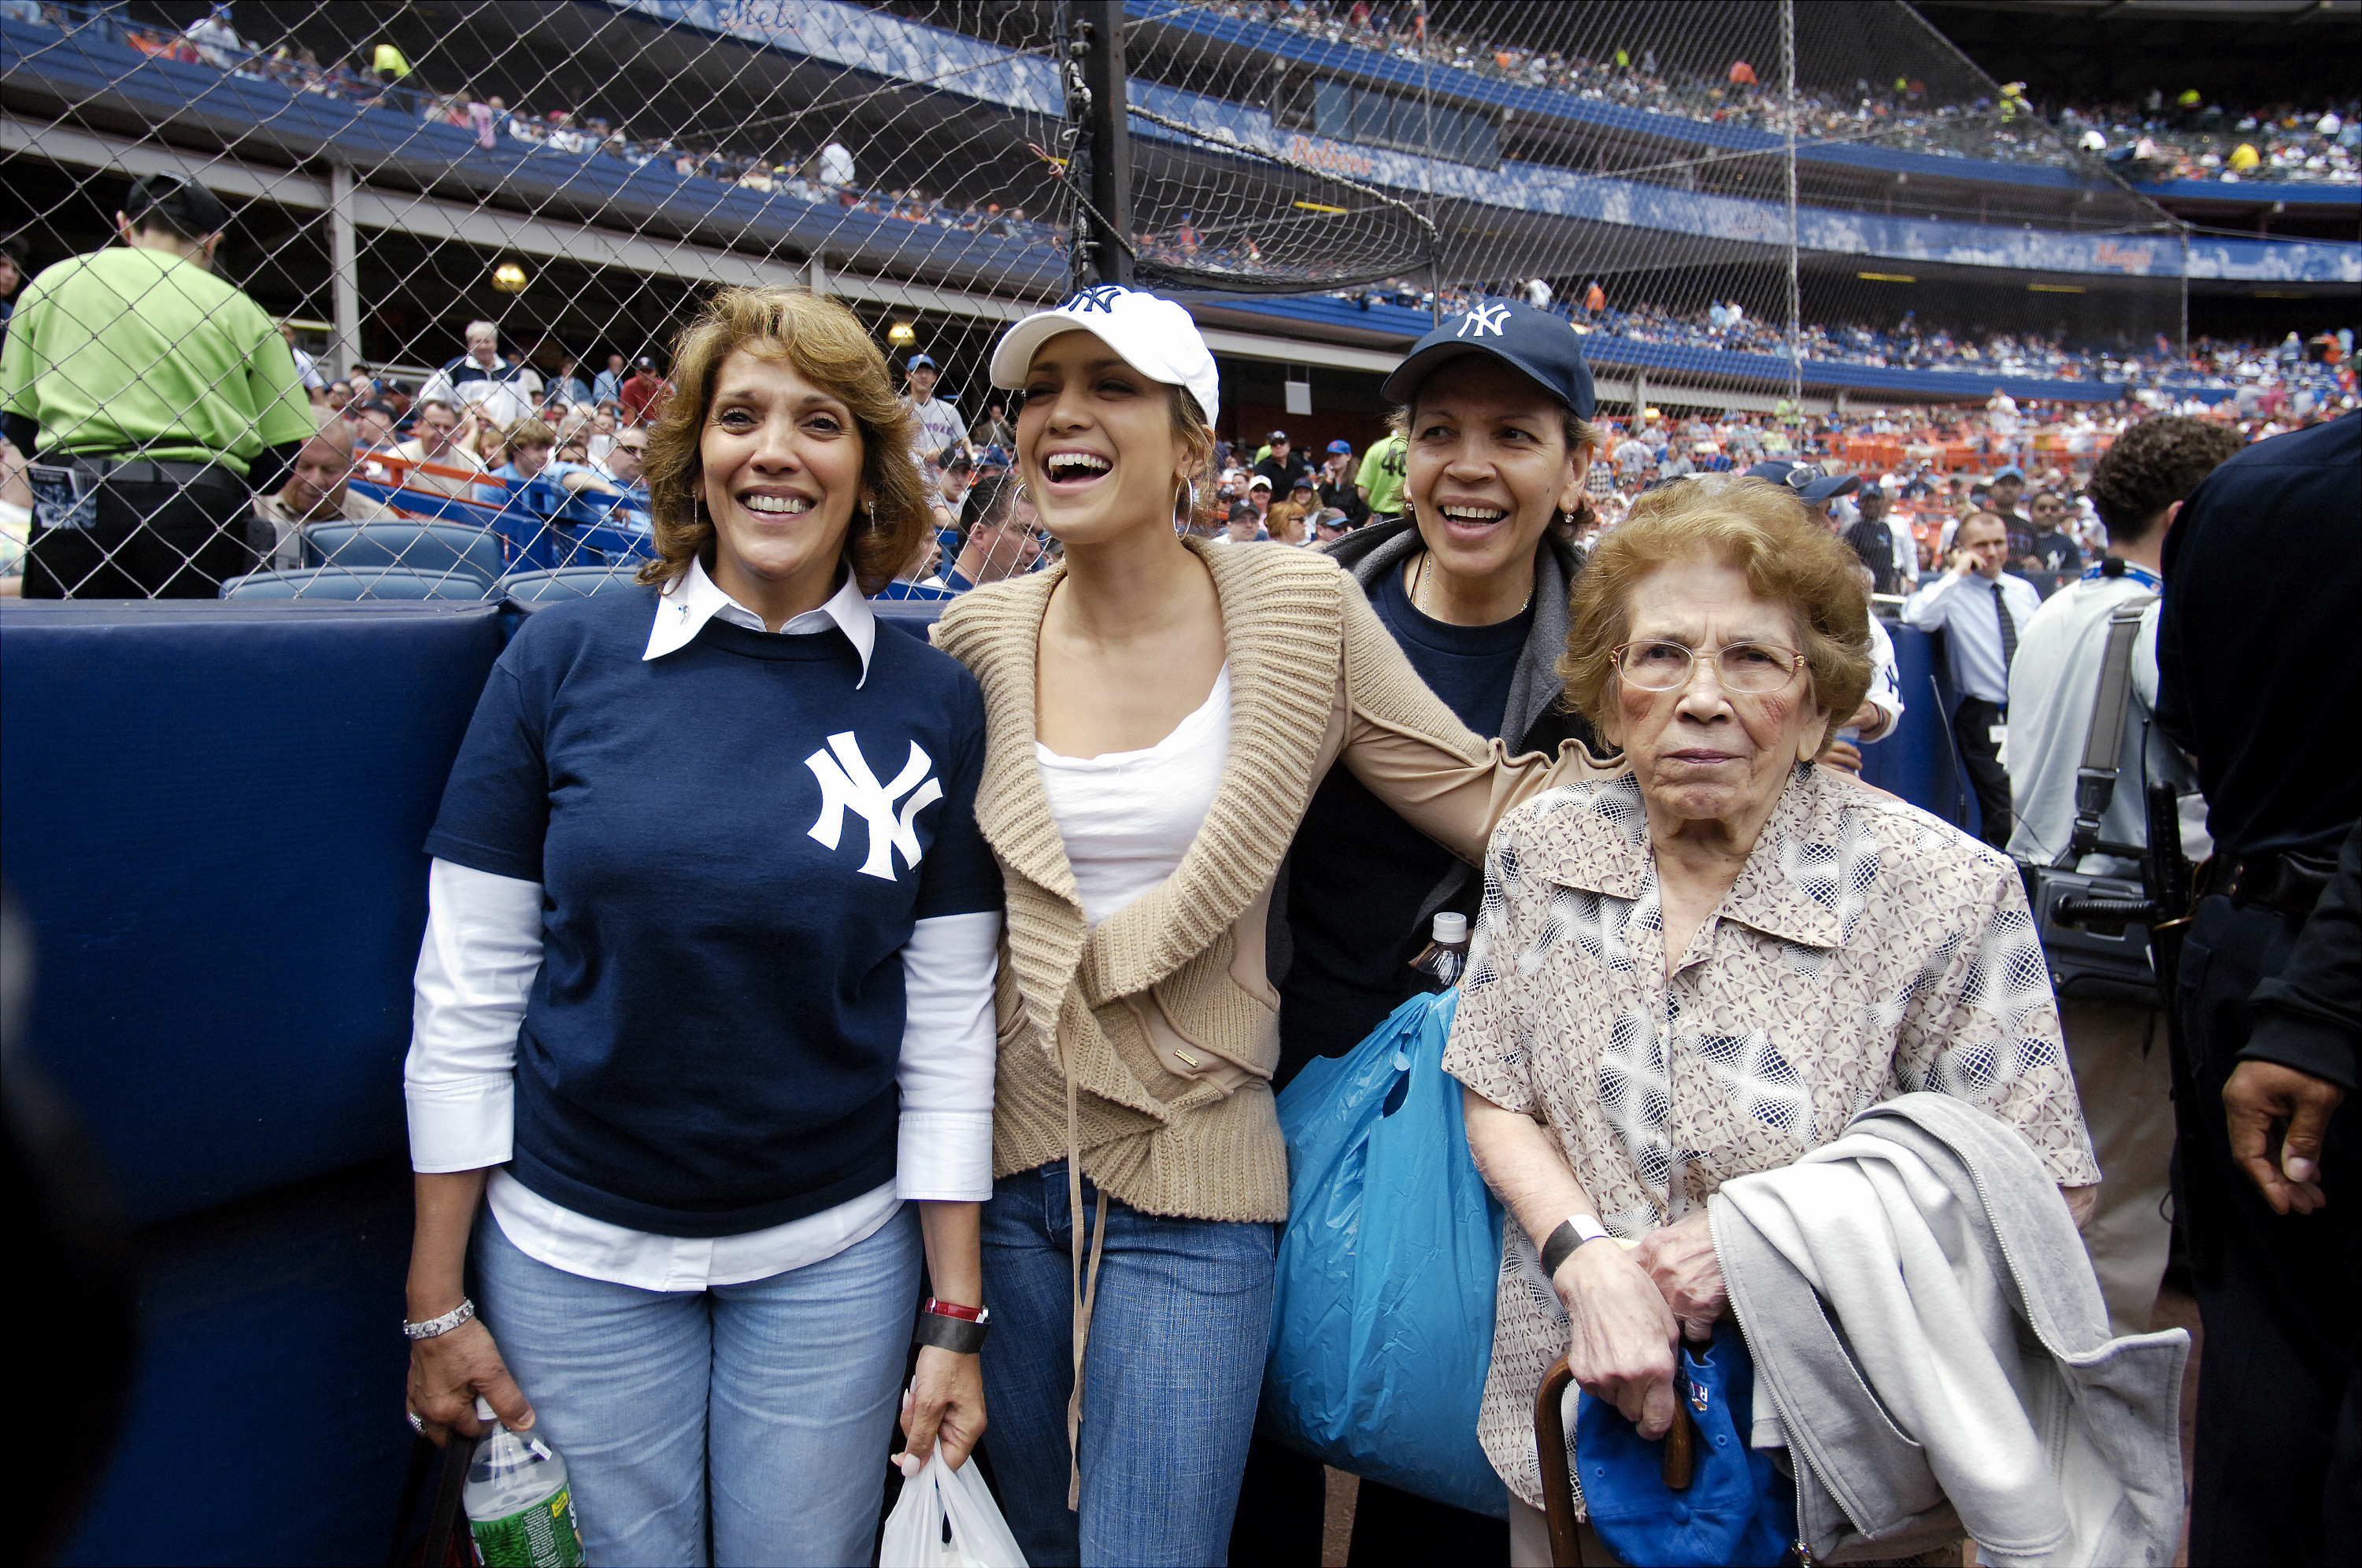 Jennifer Lopez (2nd left) takes mom Guadalupe, her cousin and her grandmother (l. to r.) to Shea Stadium, on May 21, 2005. | Source: Getty Images